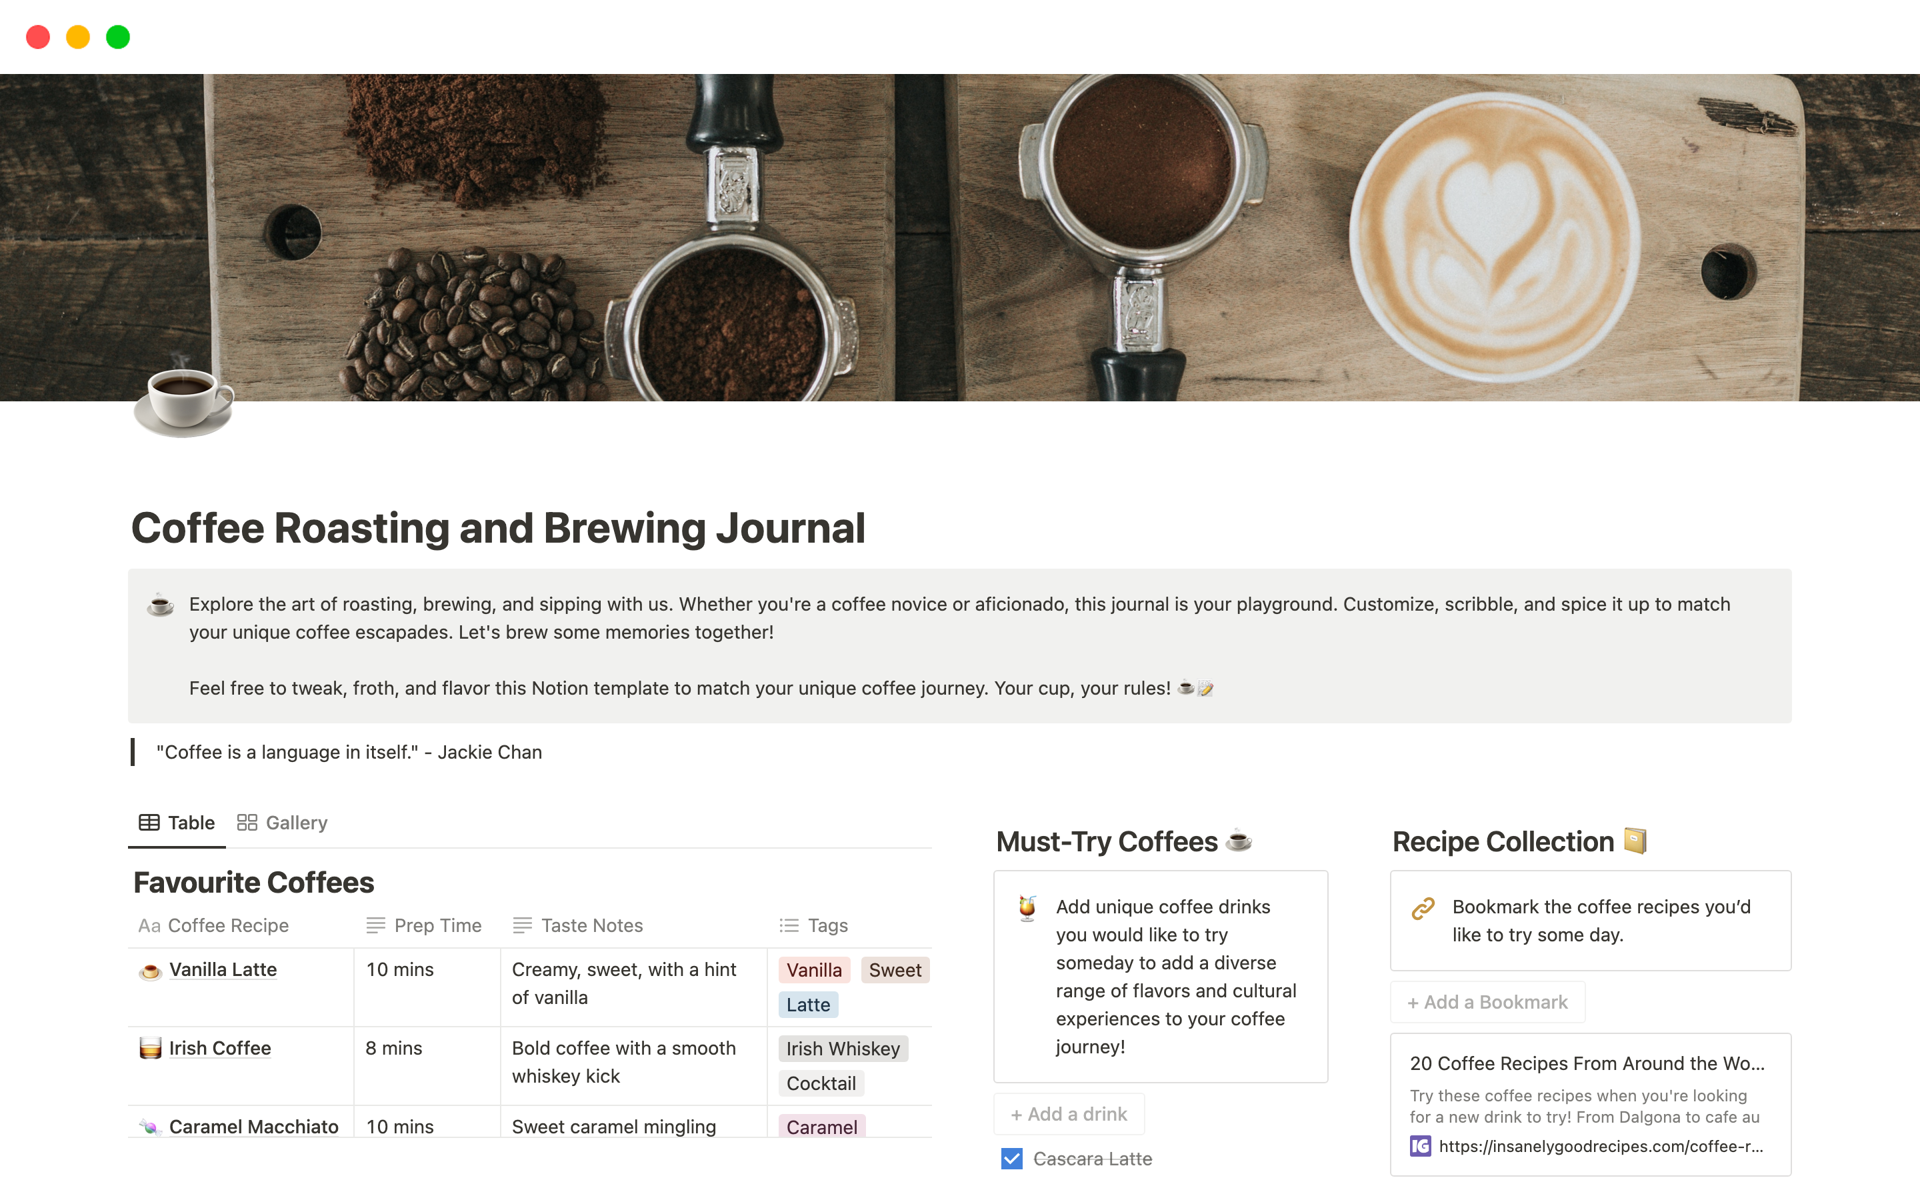 Master your coffee journey with our all-in-one Coffee Template – organize, brew, roast, wishlist, and bookmark your way to coffee perfection! ☕📚🔥